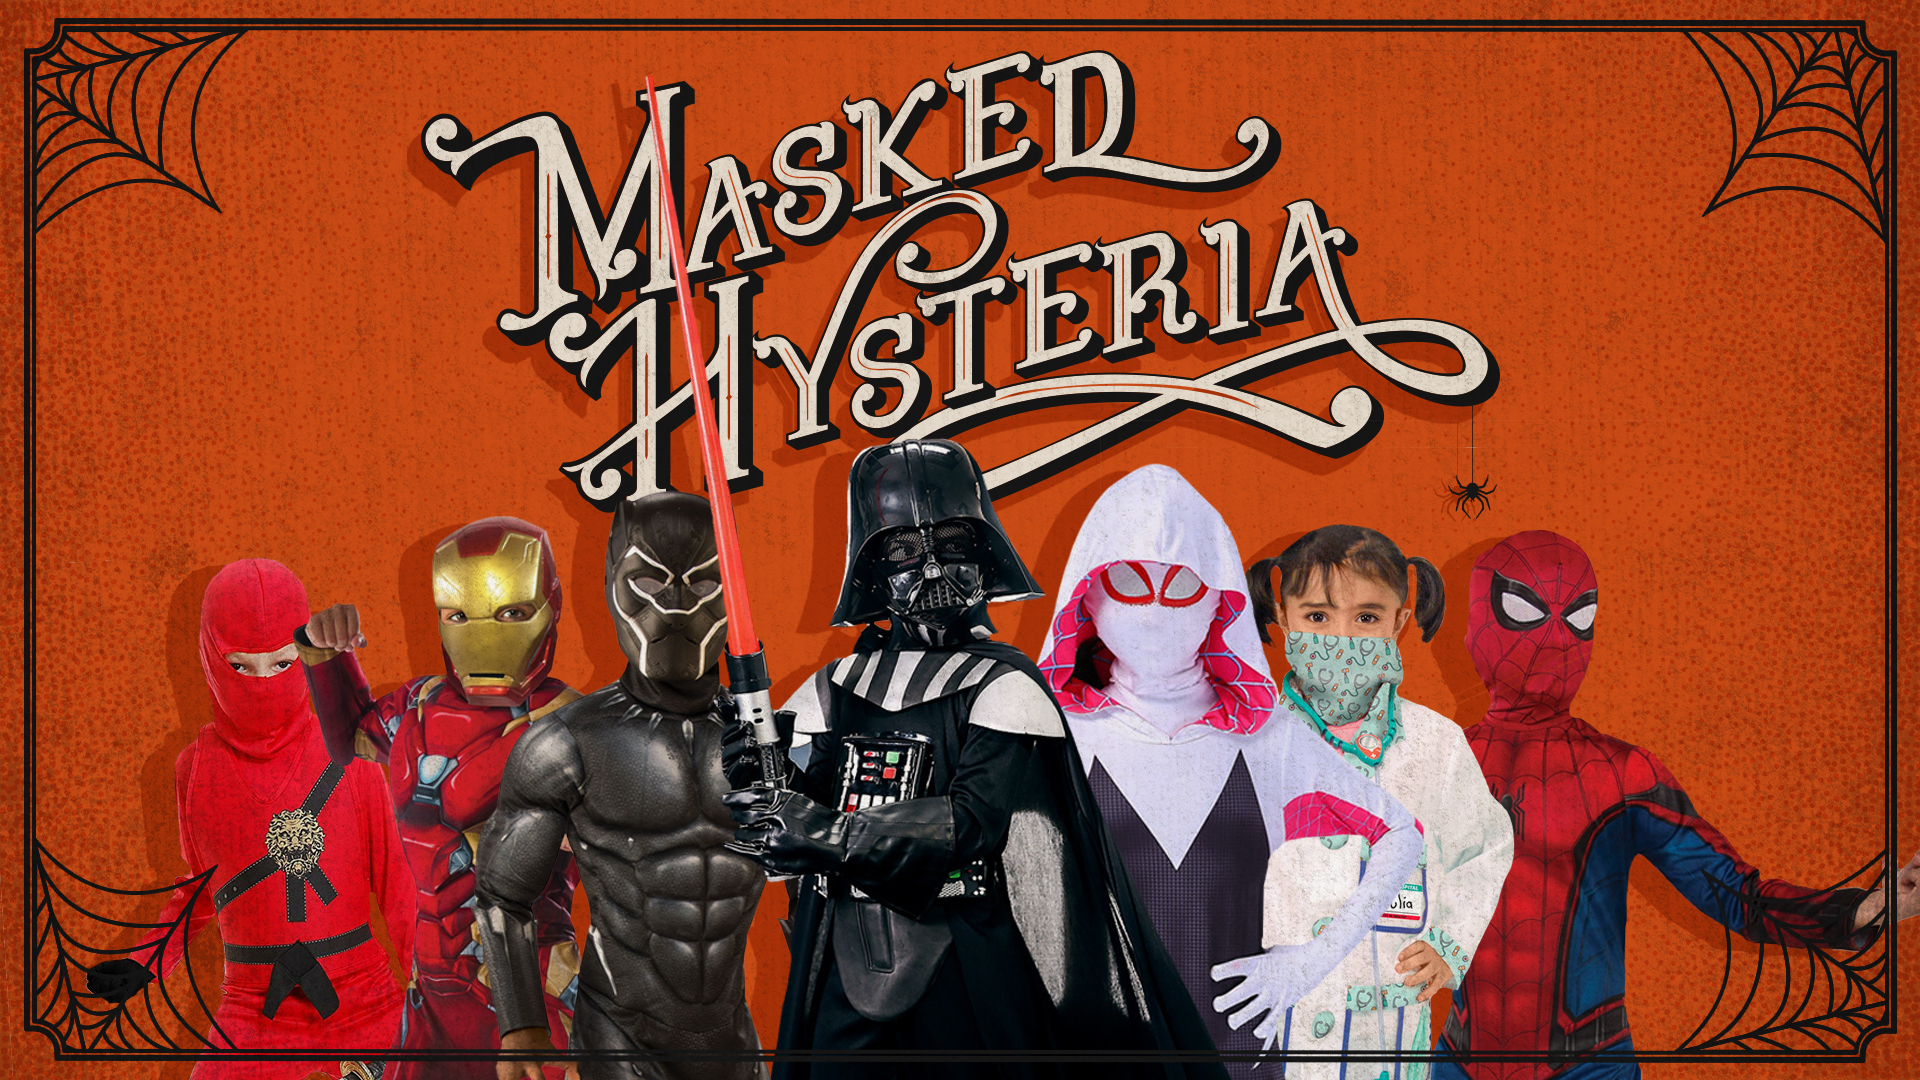      Masked Hysteria